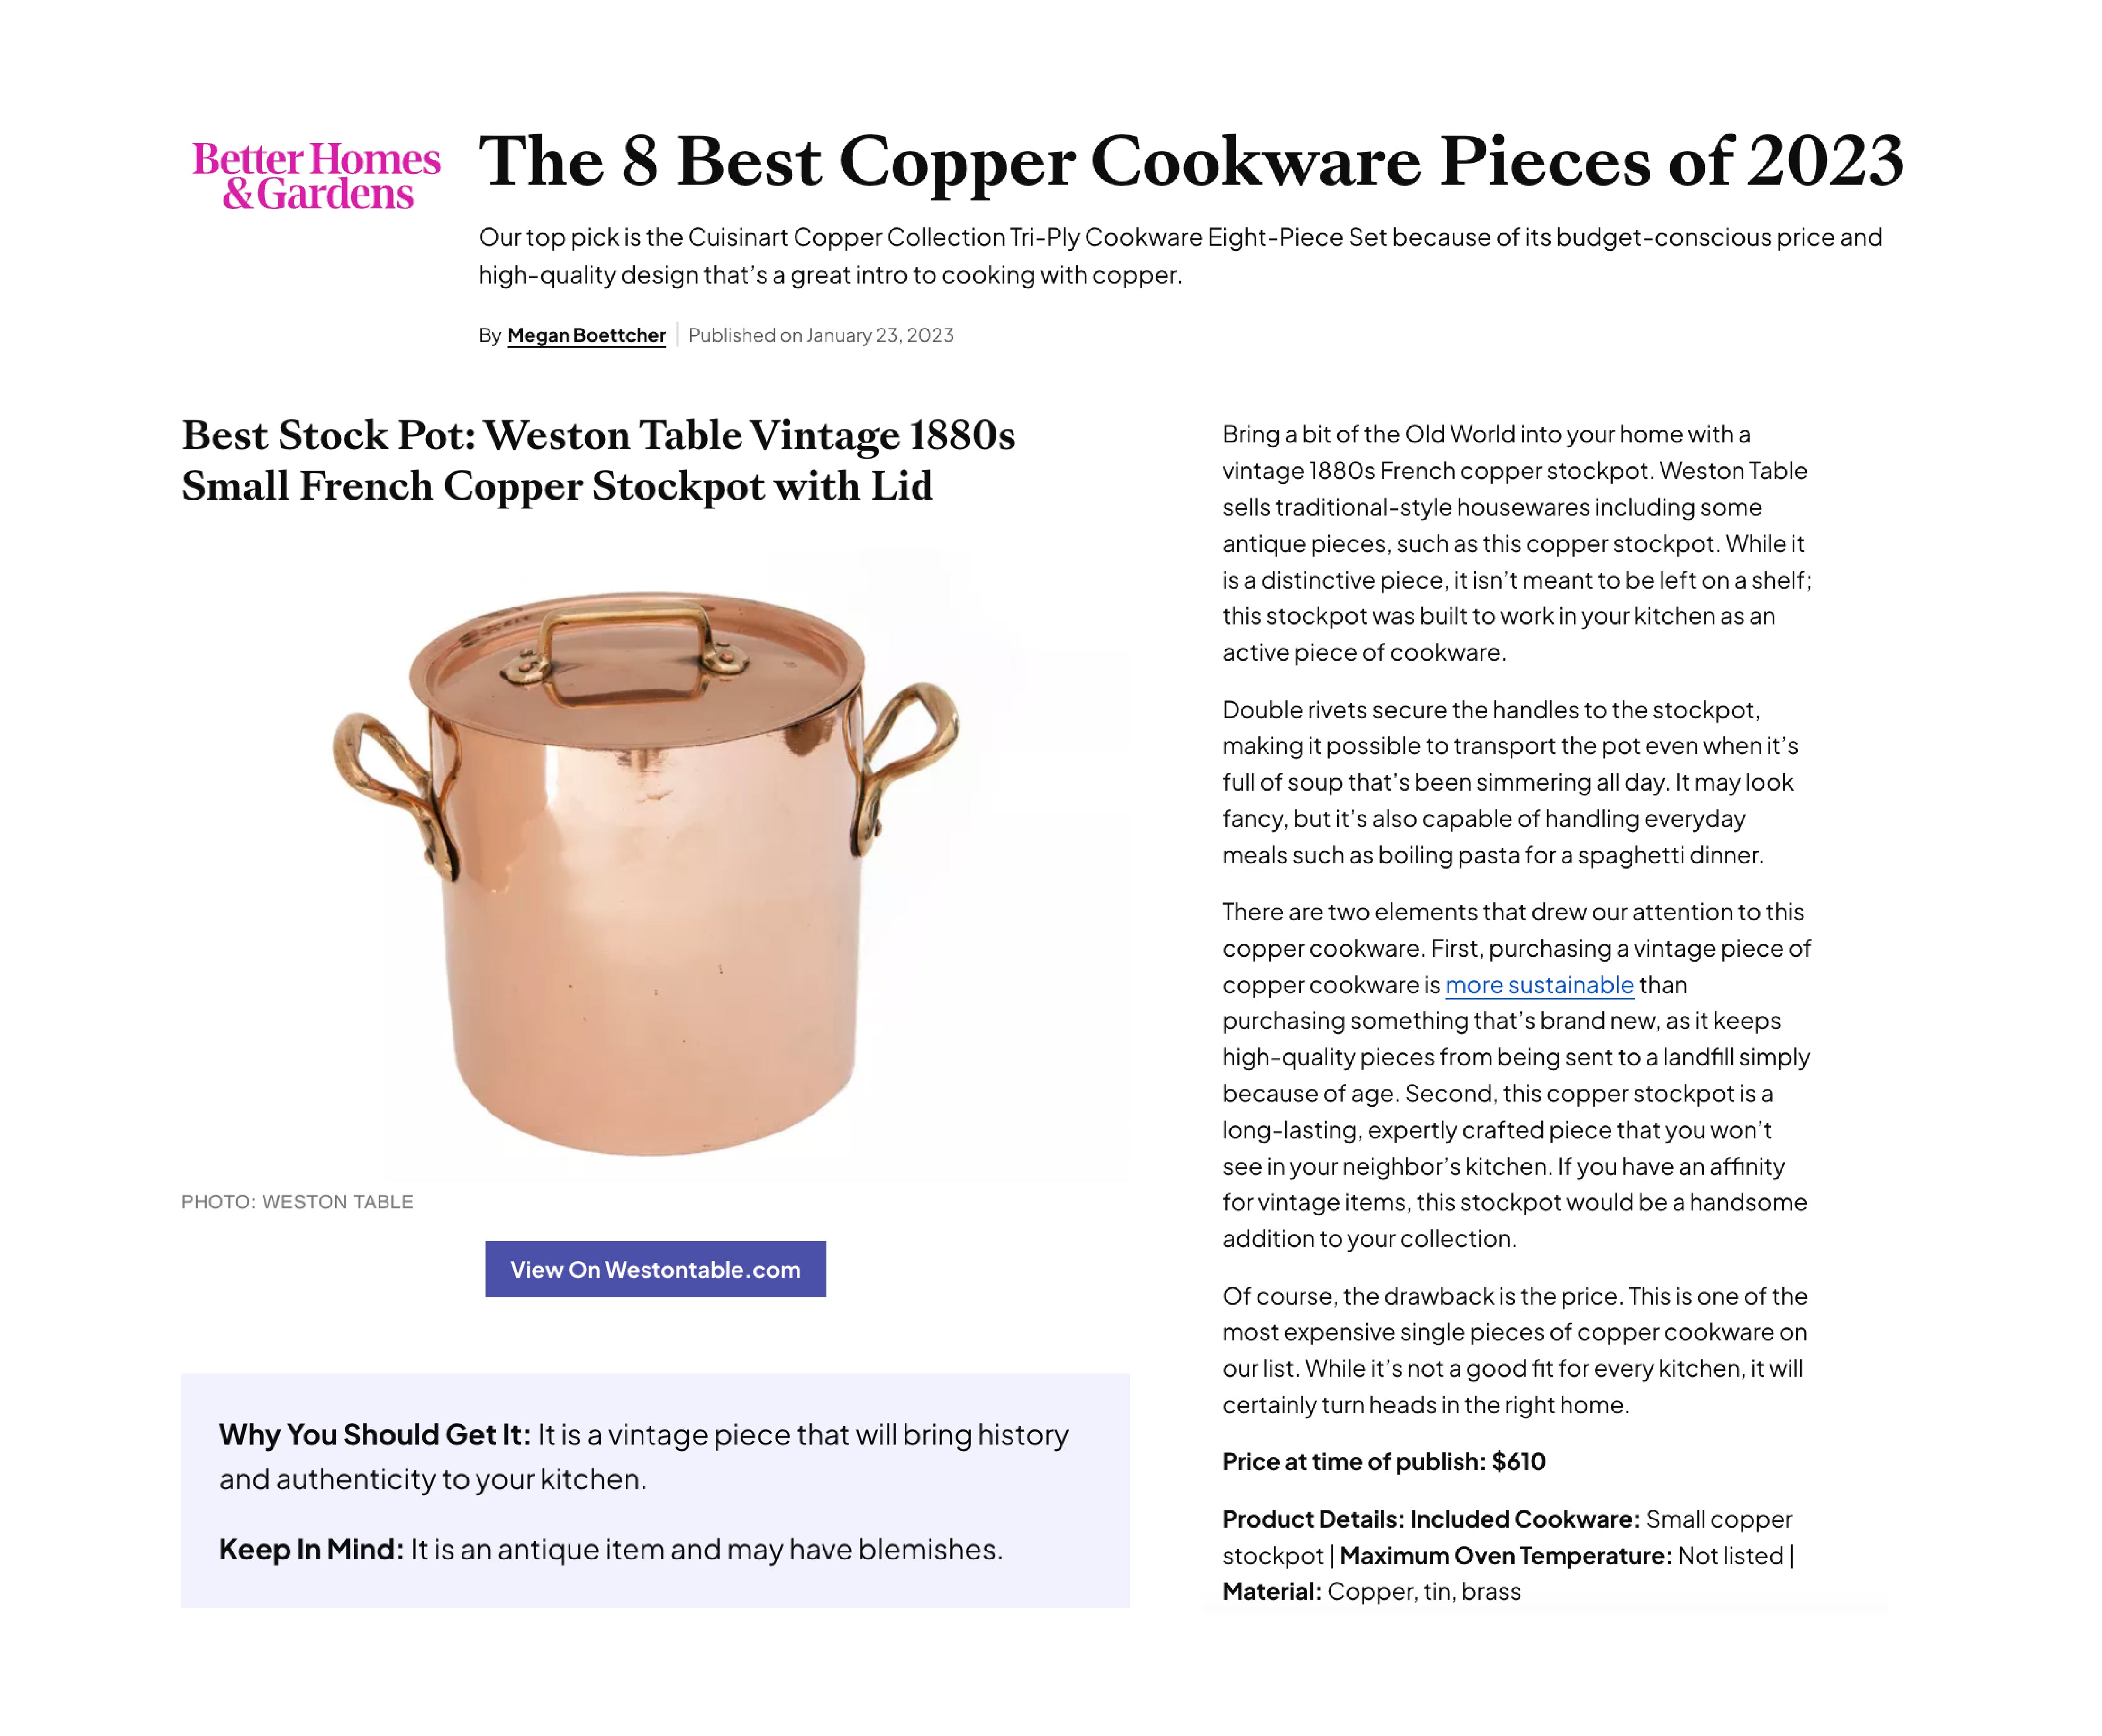 The 8 Best Copper Cookware of 2023